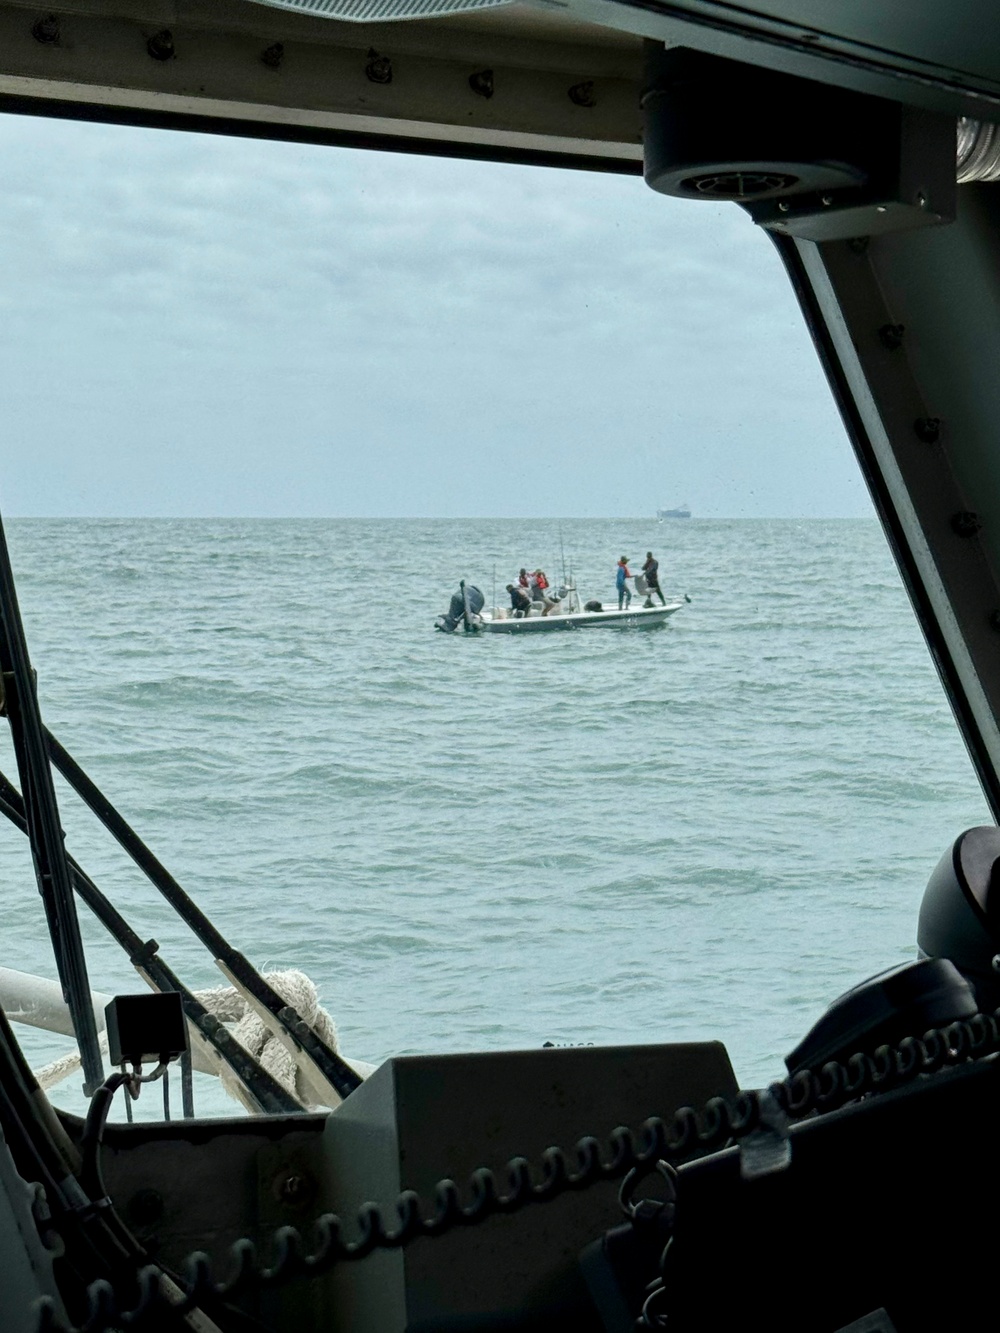 Coast Guard rescues 6 from sinking boat offshore Freeport, Texas [Image 3 of 3]